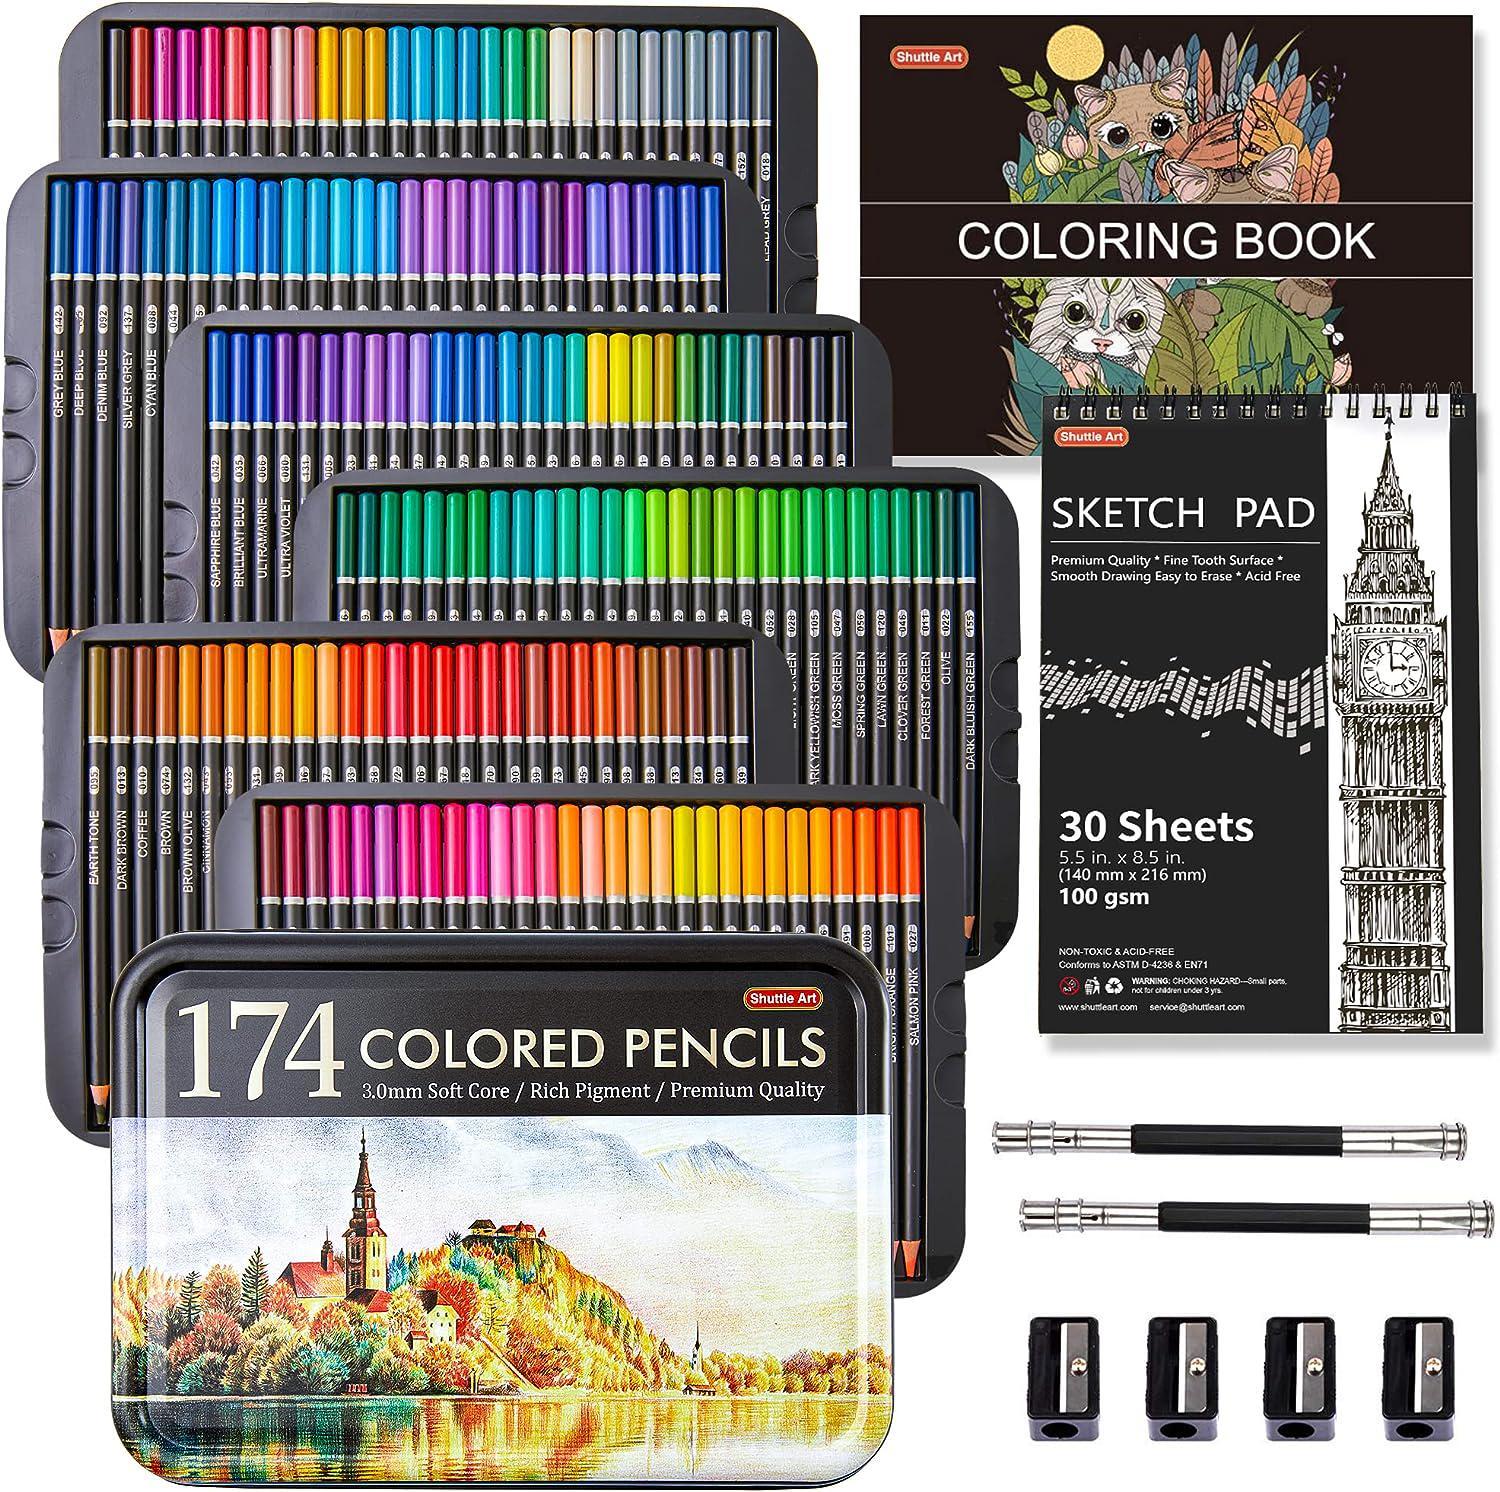 Drawing Kit, Shuttle Art 103 Pack Drawing Pencils Set, Sketching and Drawing Art Set with Colored Pencils, Sketch and Graphite Pencils in Portable